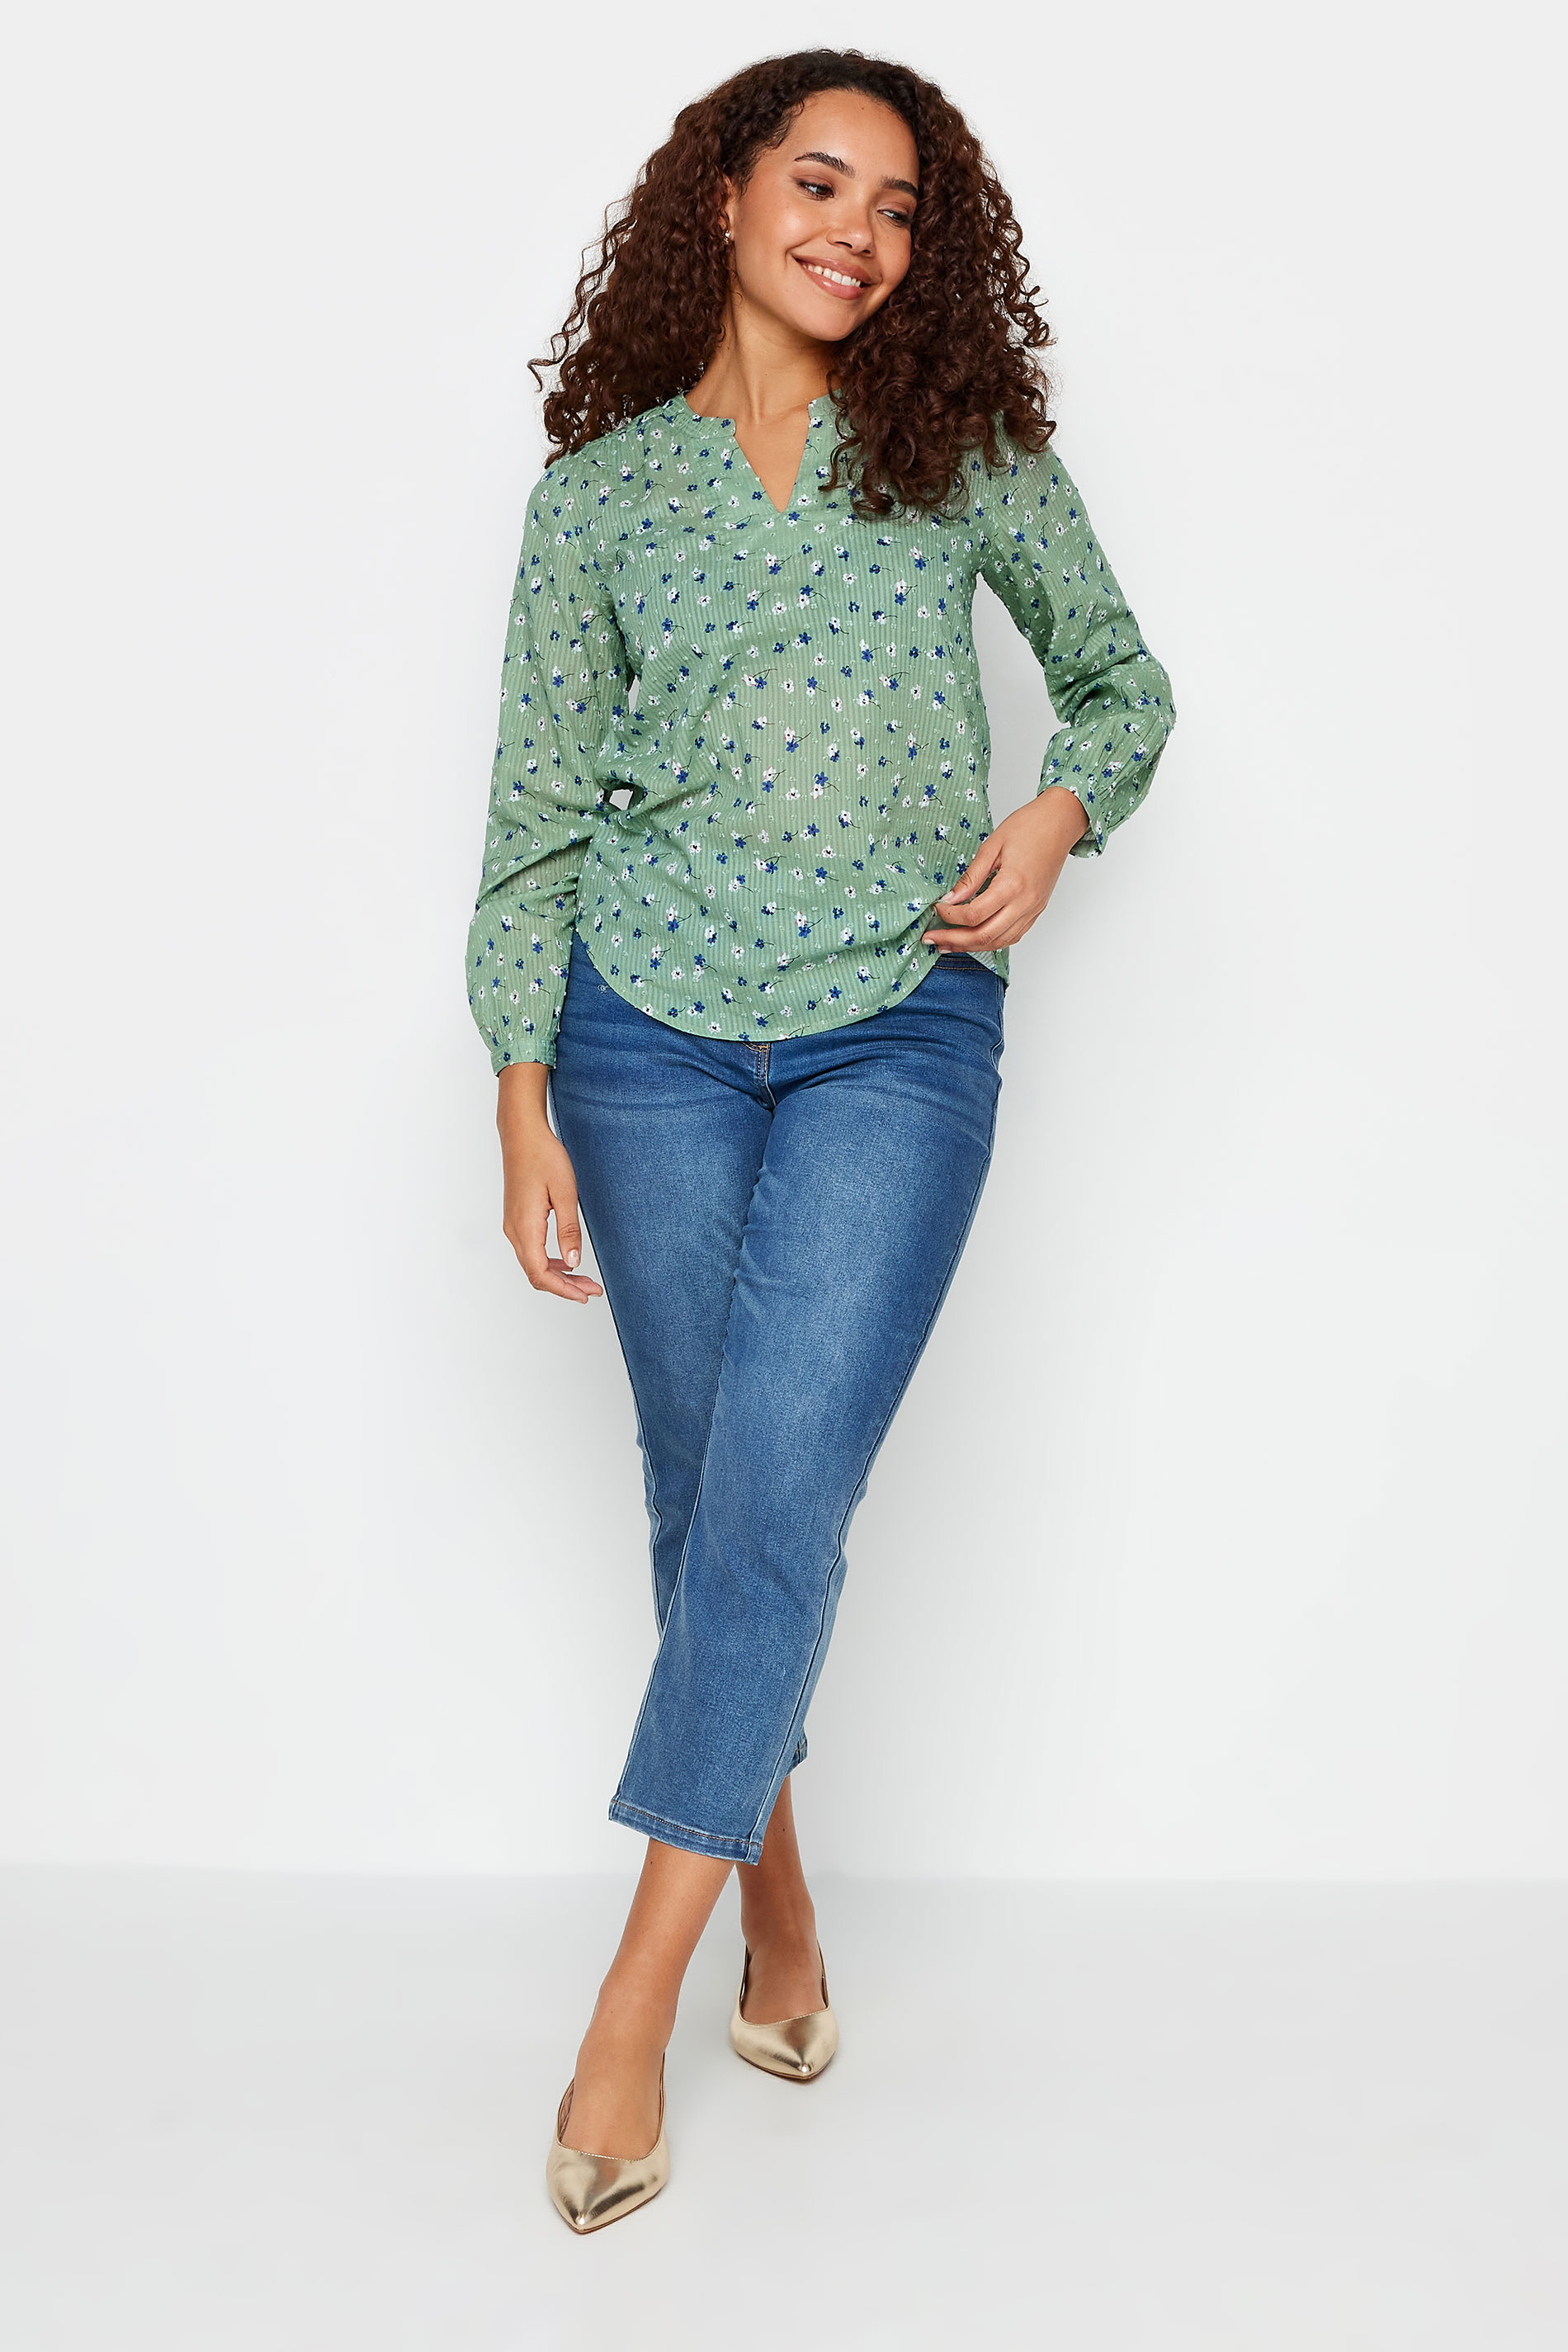 M&Co Green Floral Print Dobby Blouse | M&Co 3